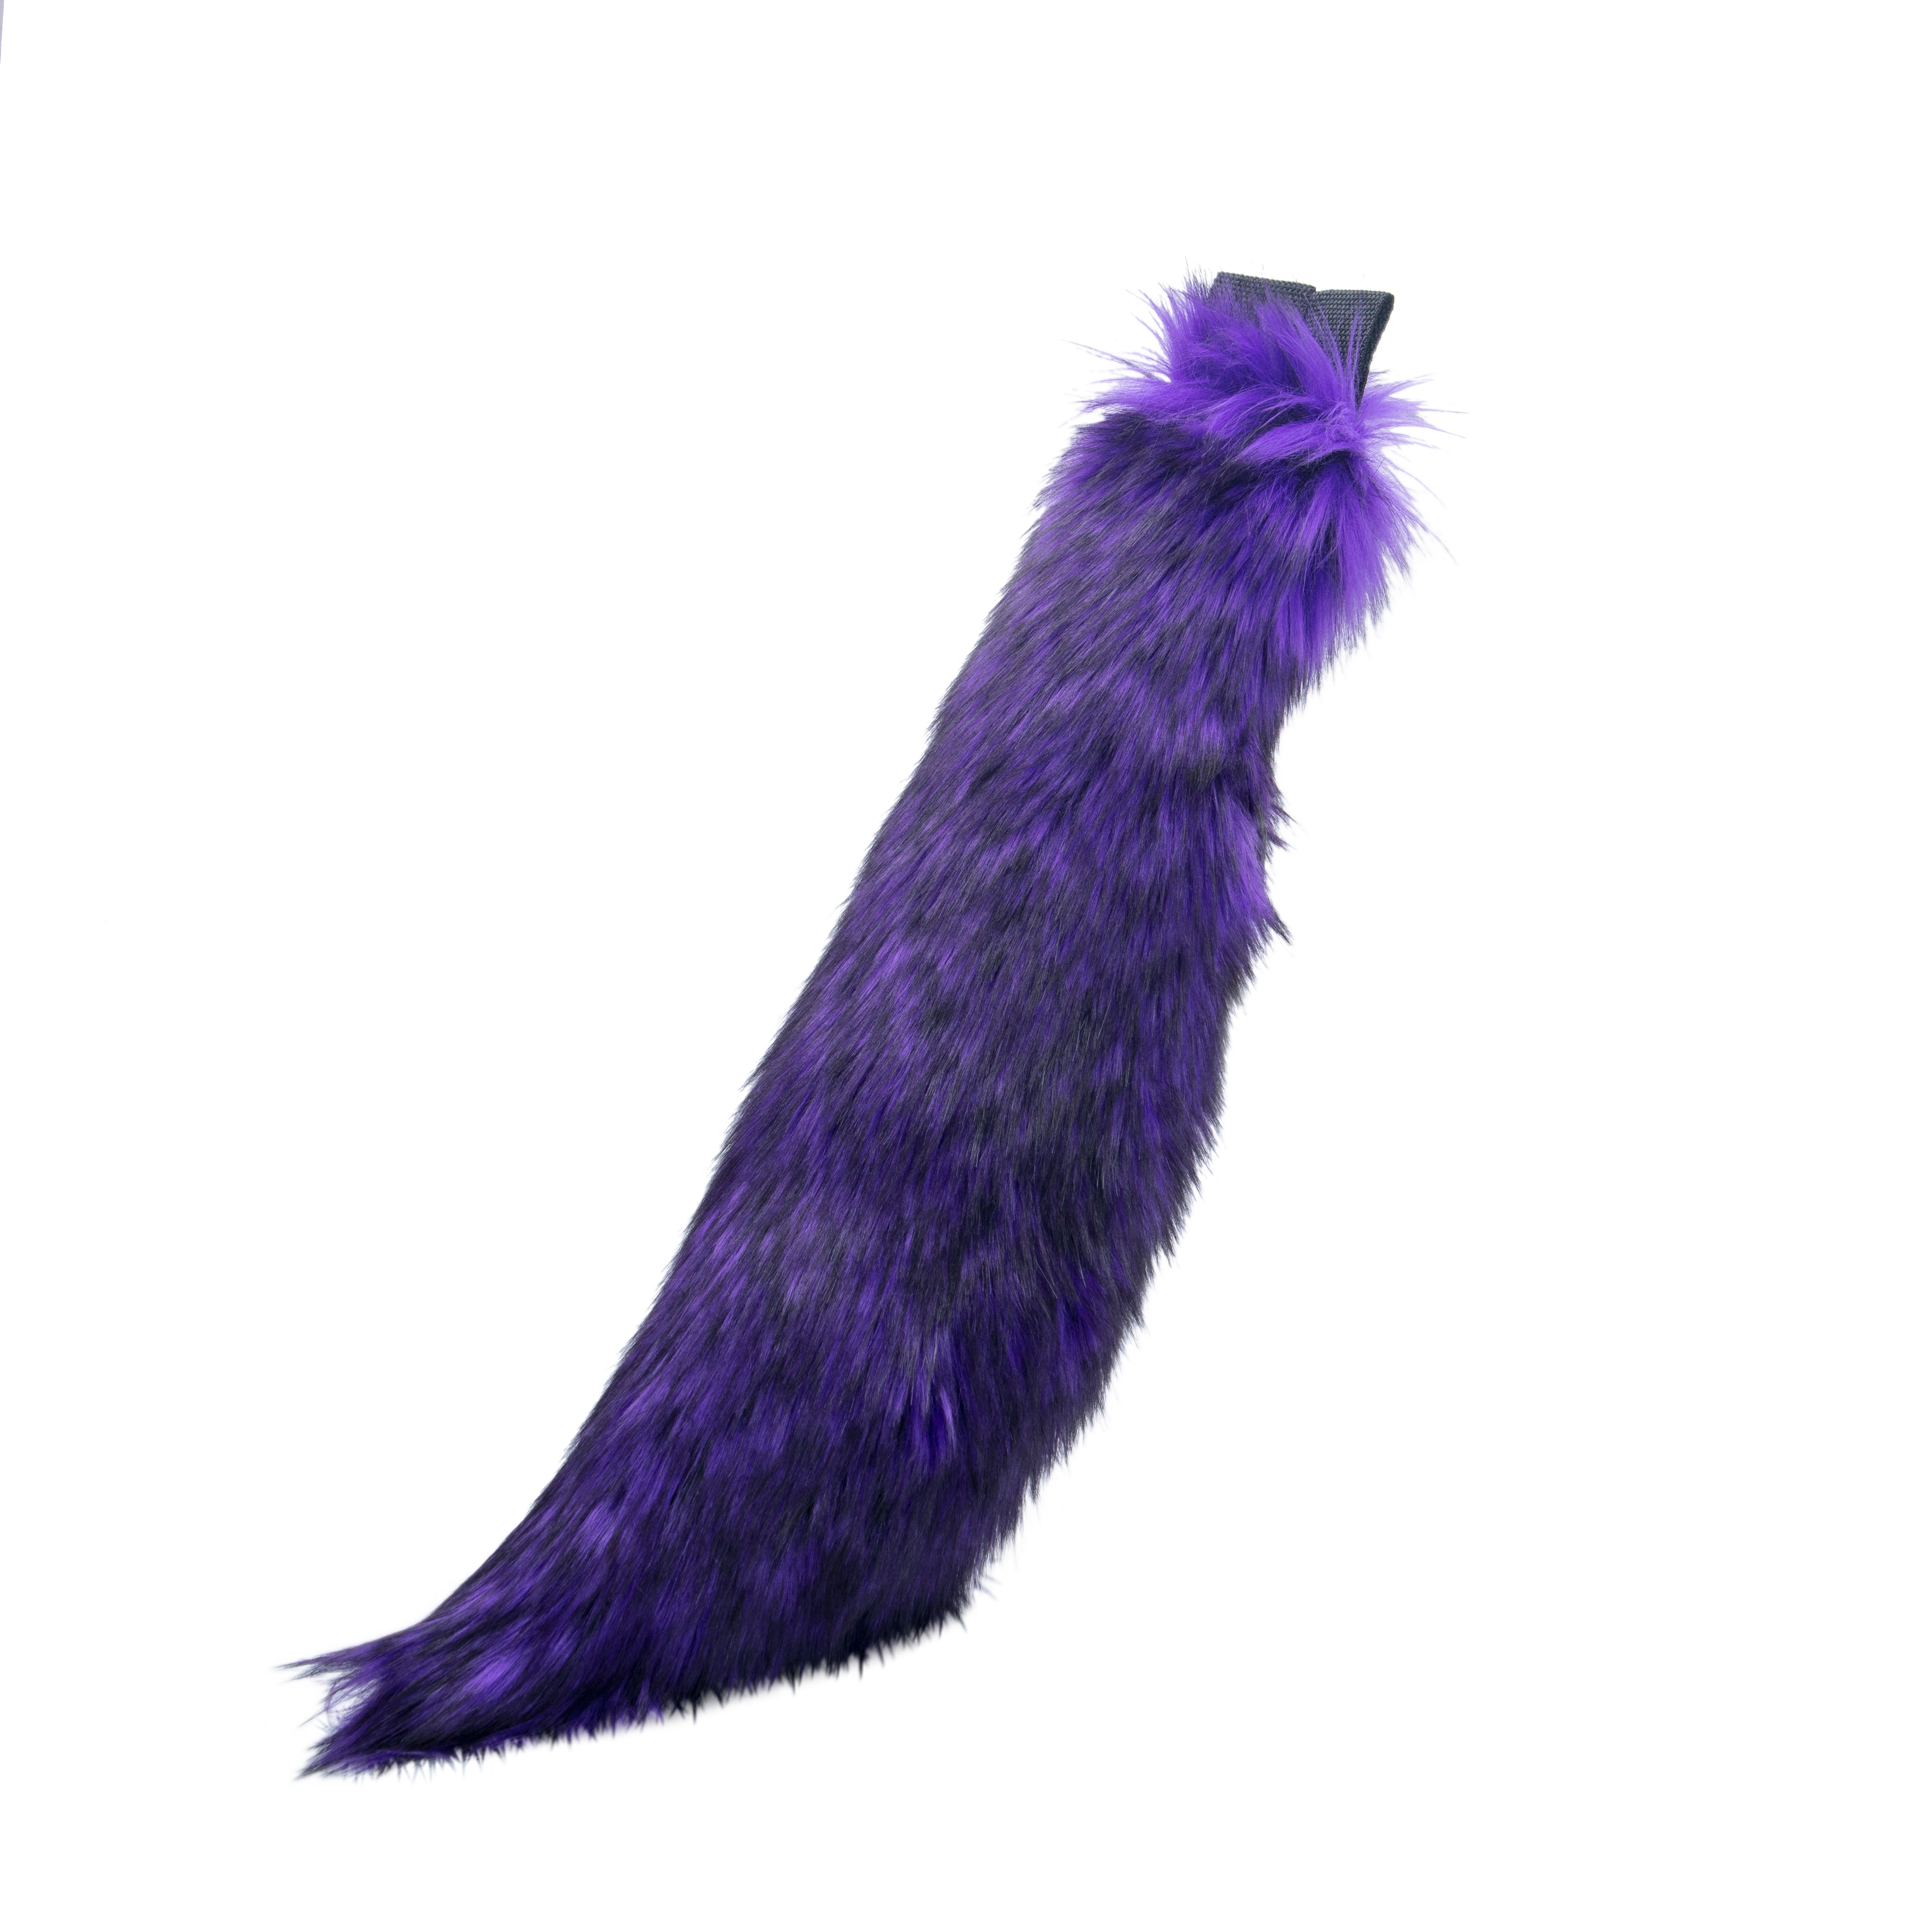 purple pawstar faux fur wild wolf mini tail for furries and cosplay.